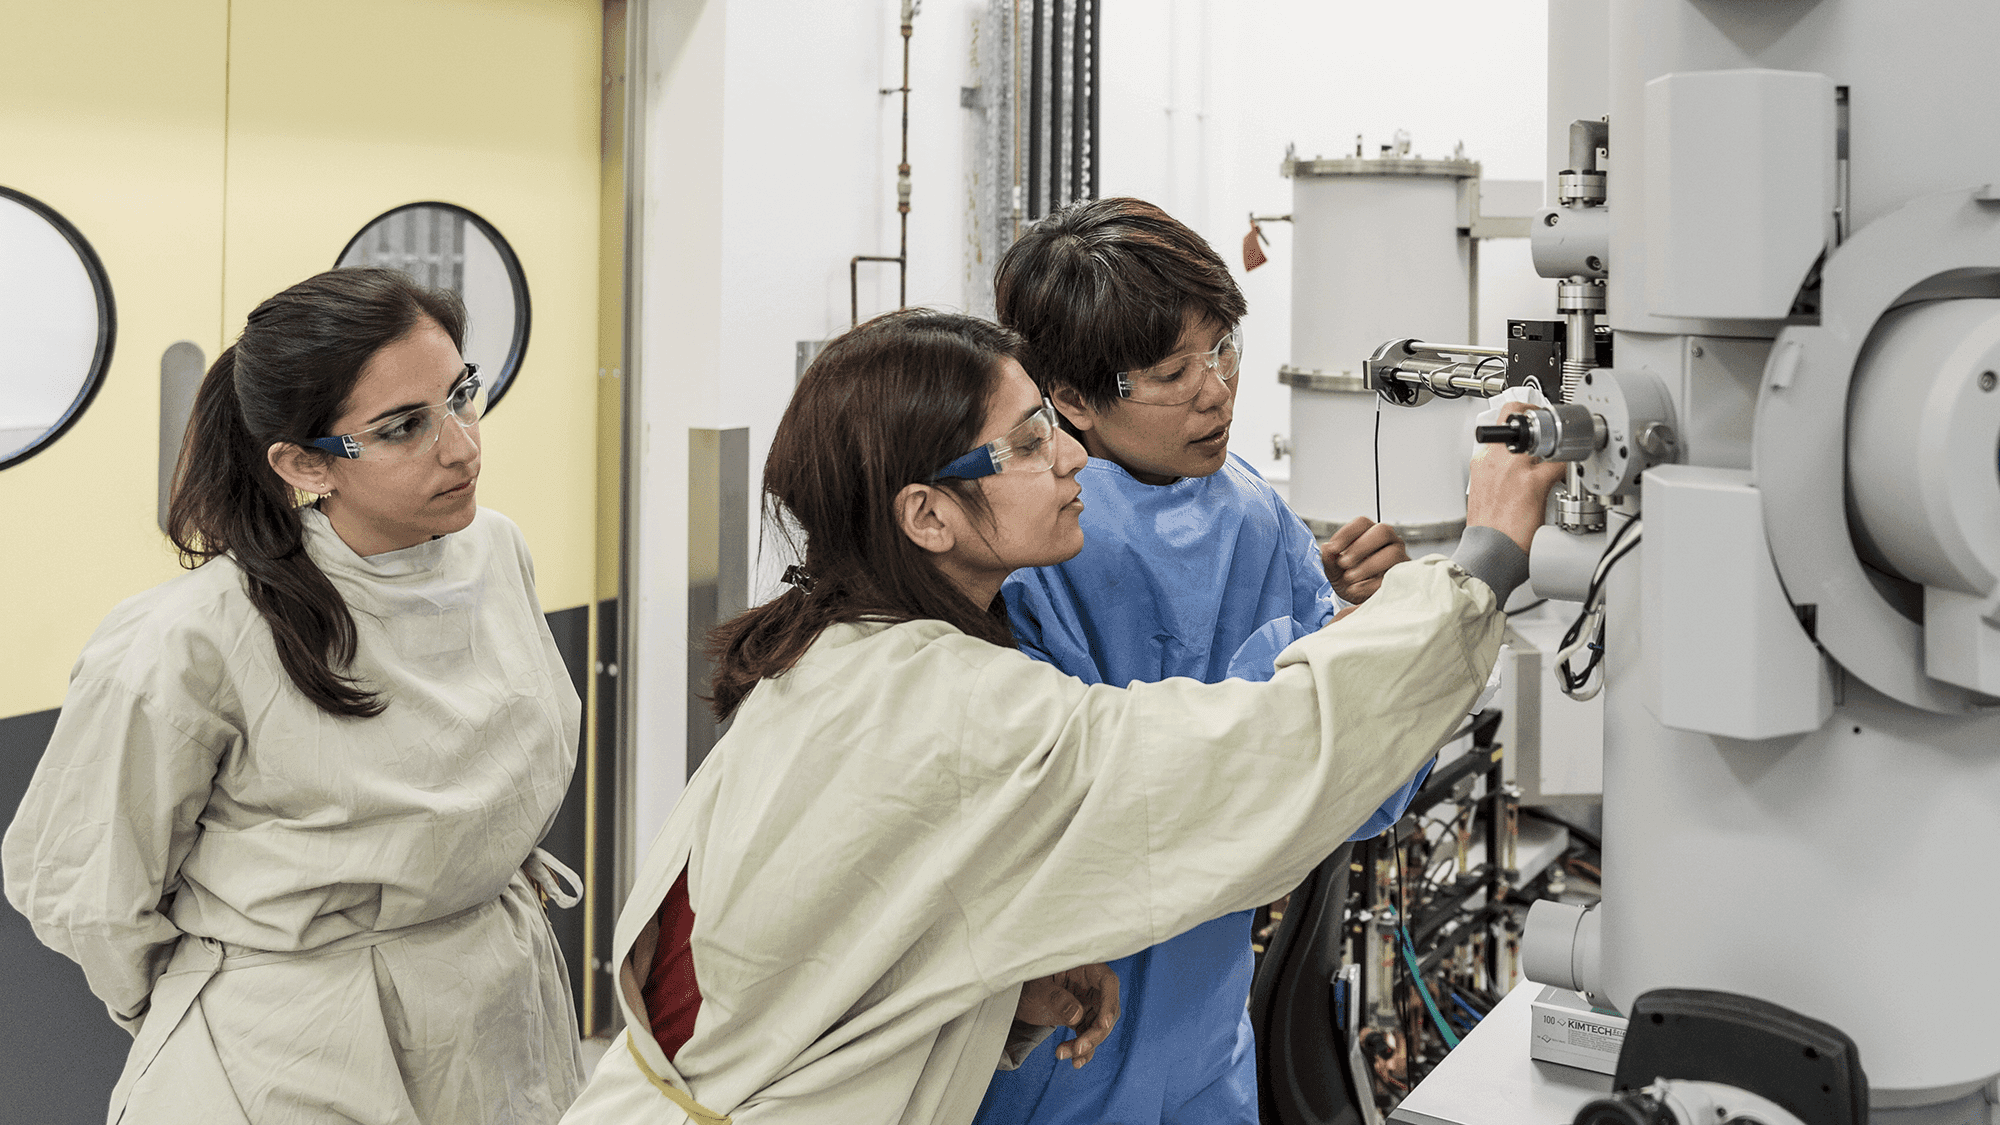 Three female researchers look at machinery in a lab.